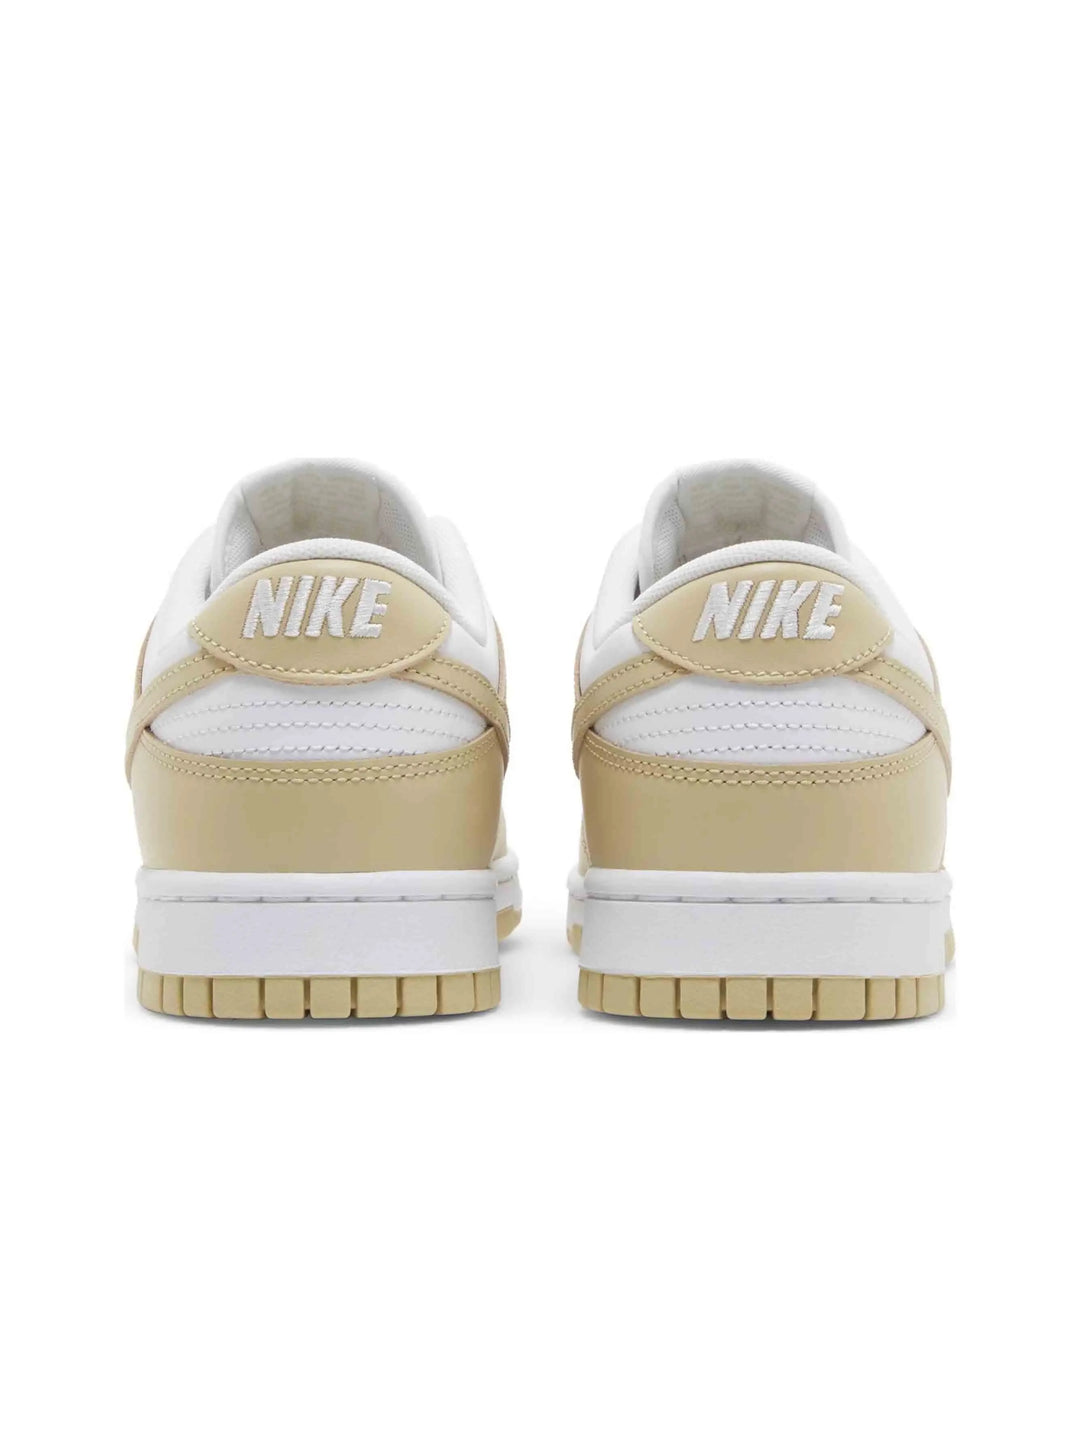 Nike Dunk Low Team Gold Prior